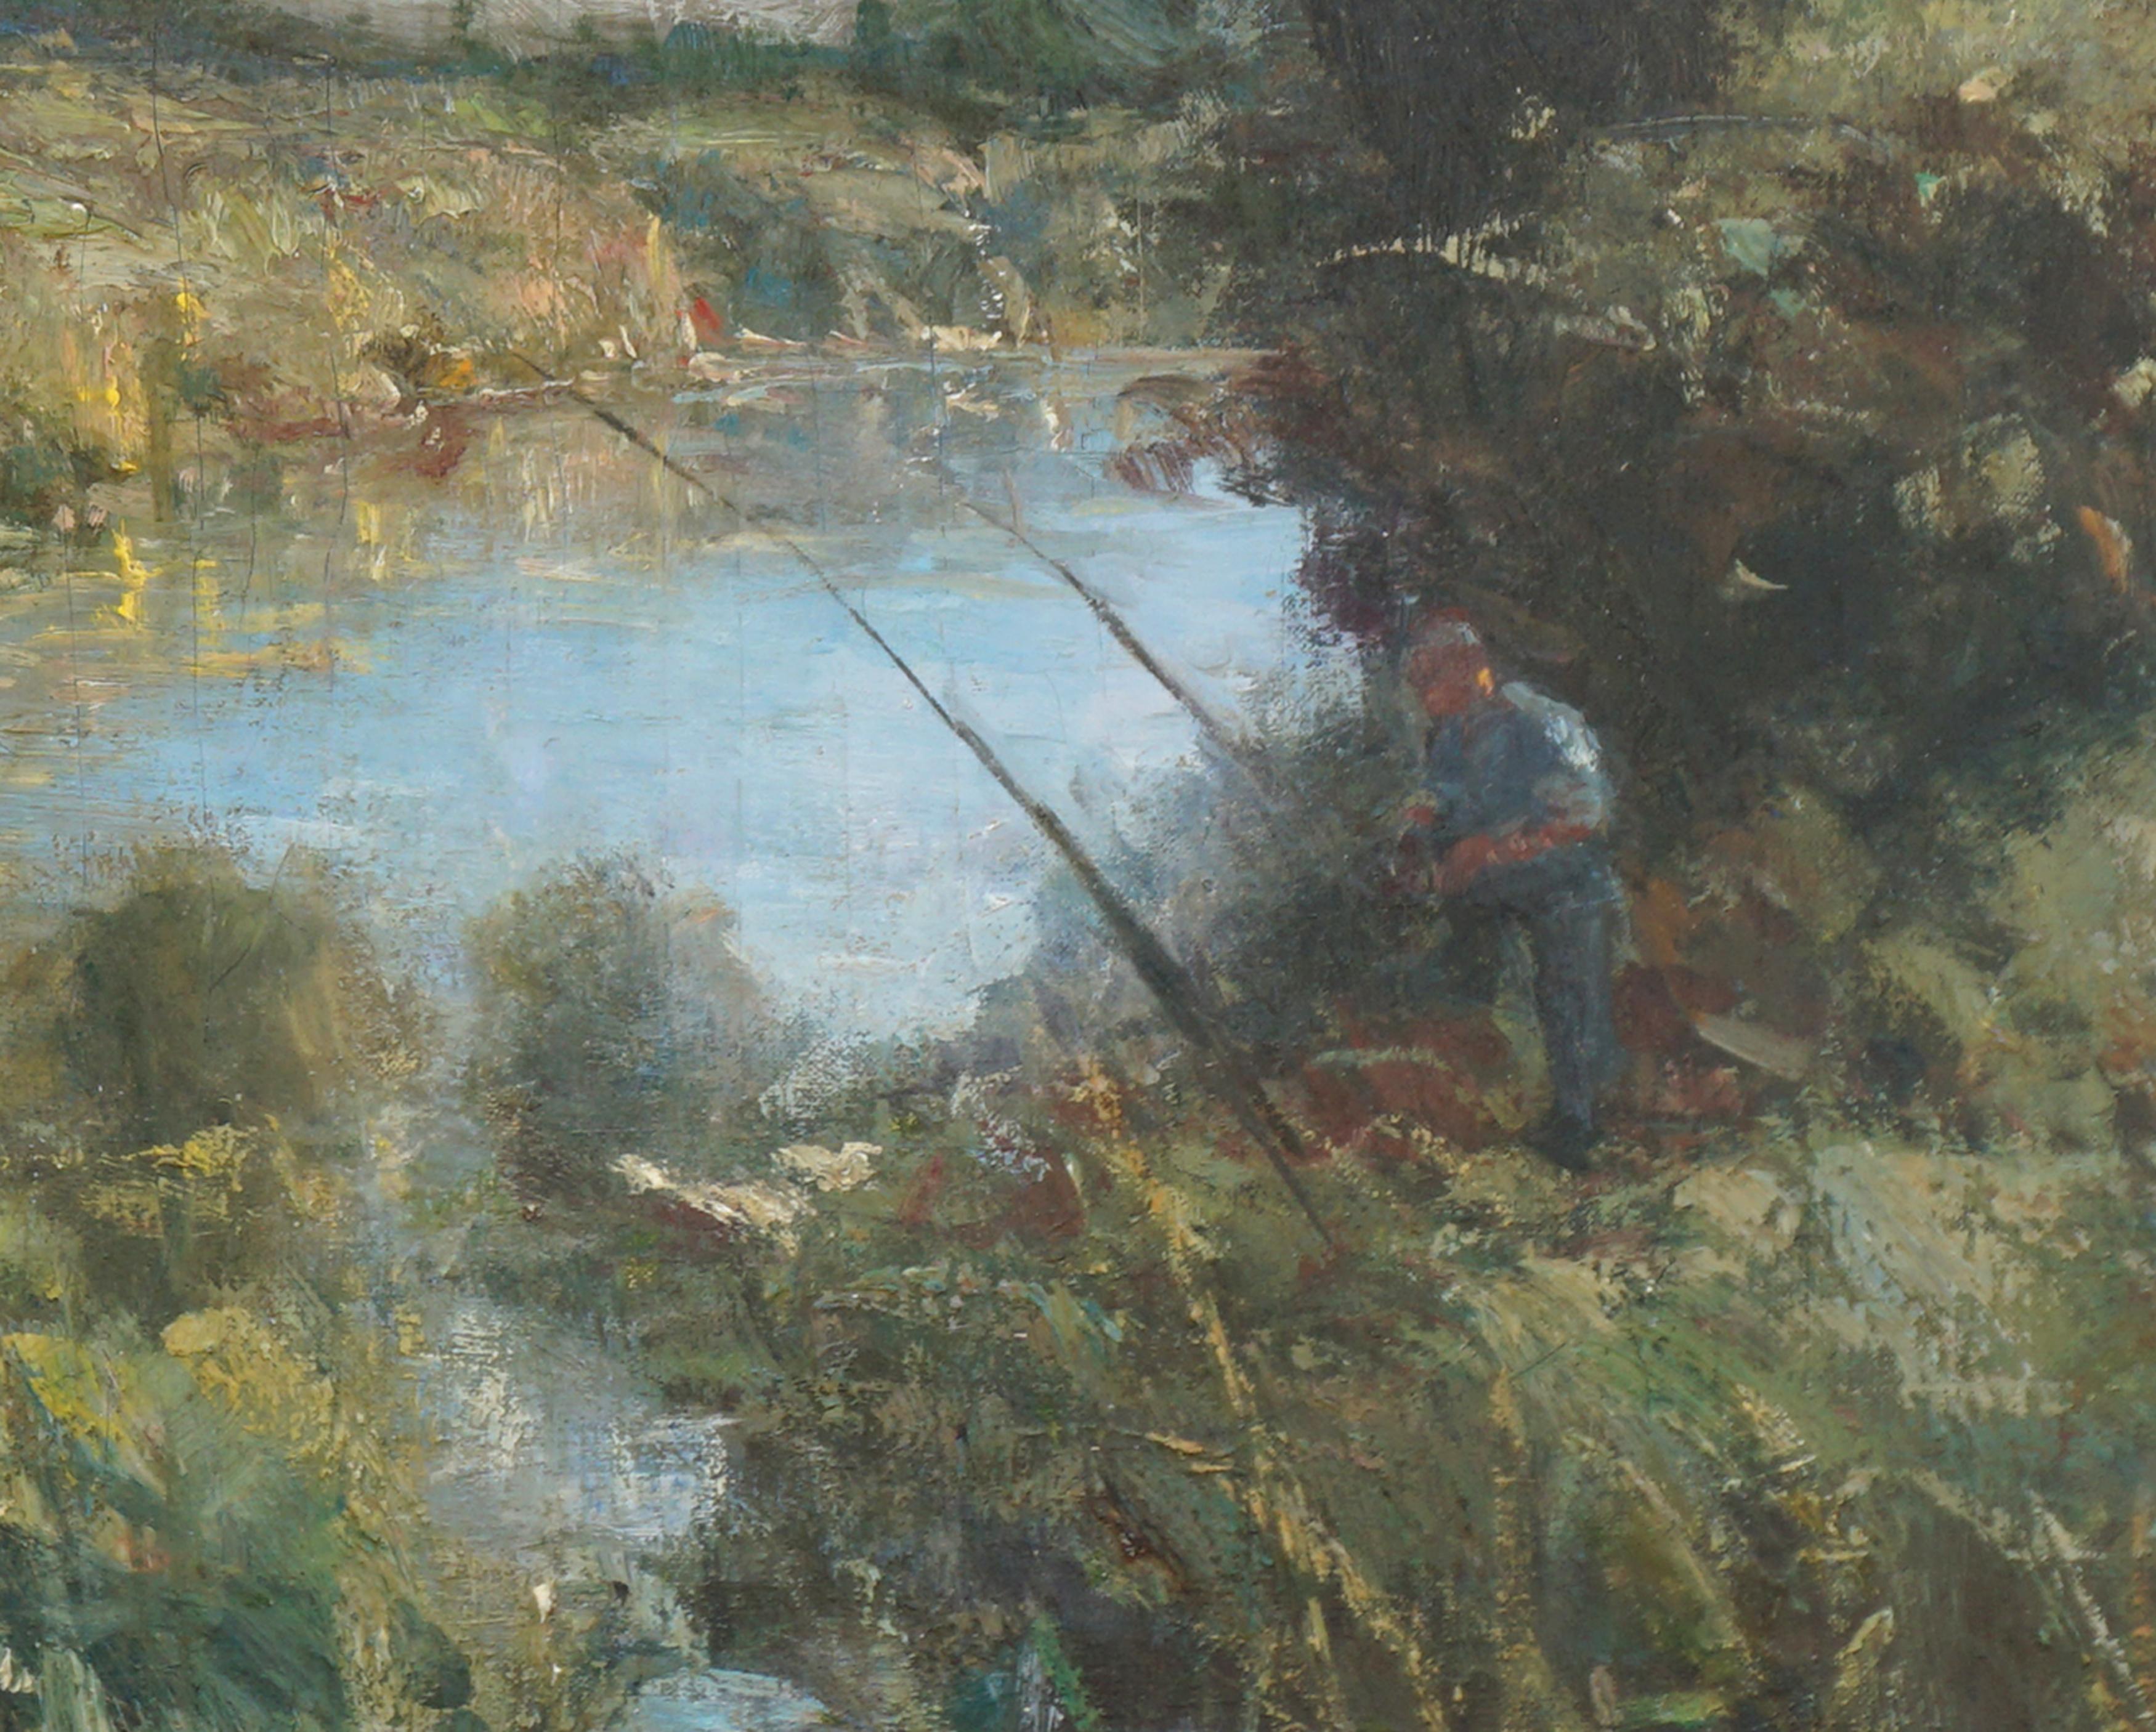 The Angler - Impressionist Landscape with Figure - American Impressionist Painting by Unknown